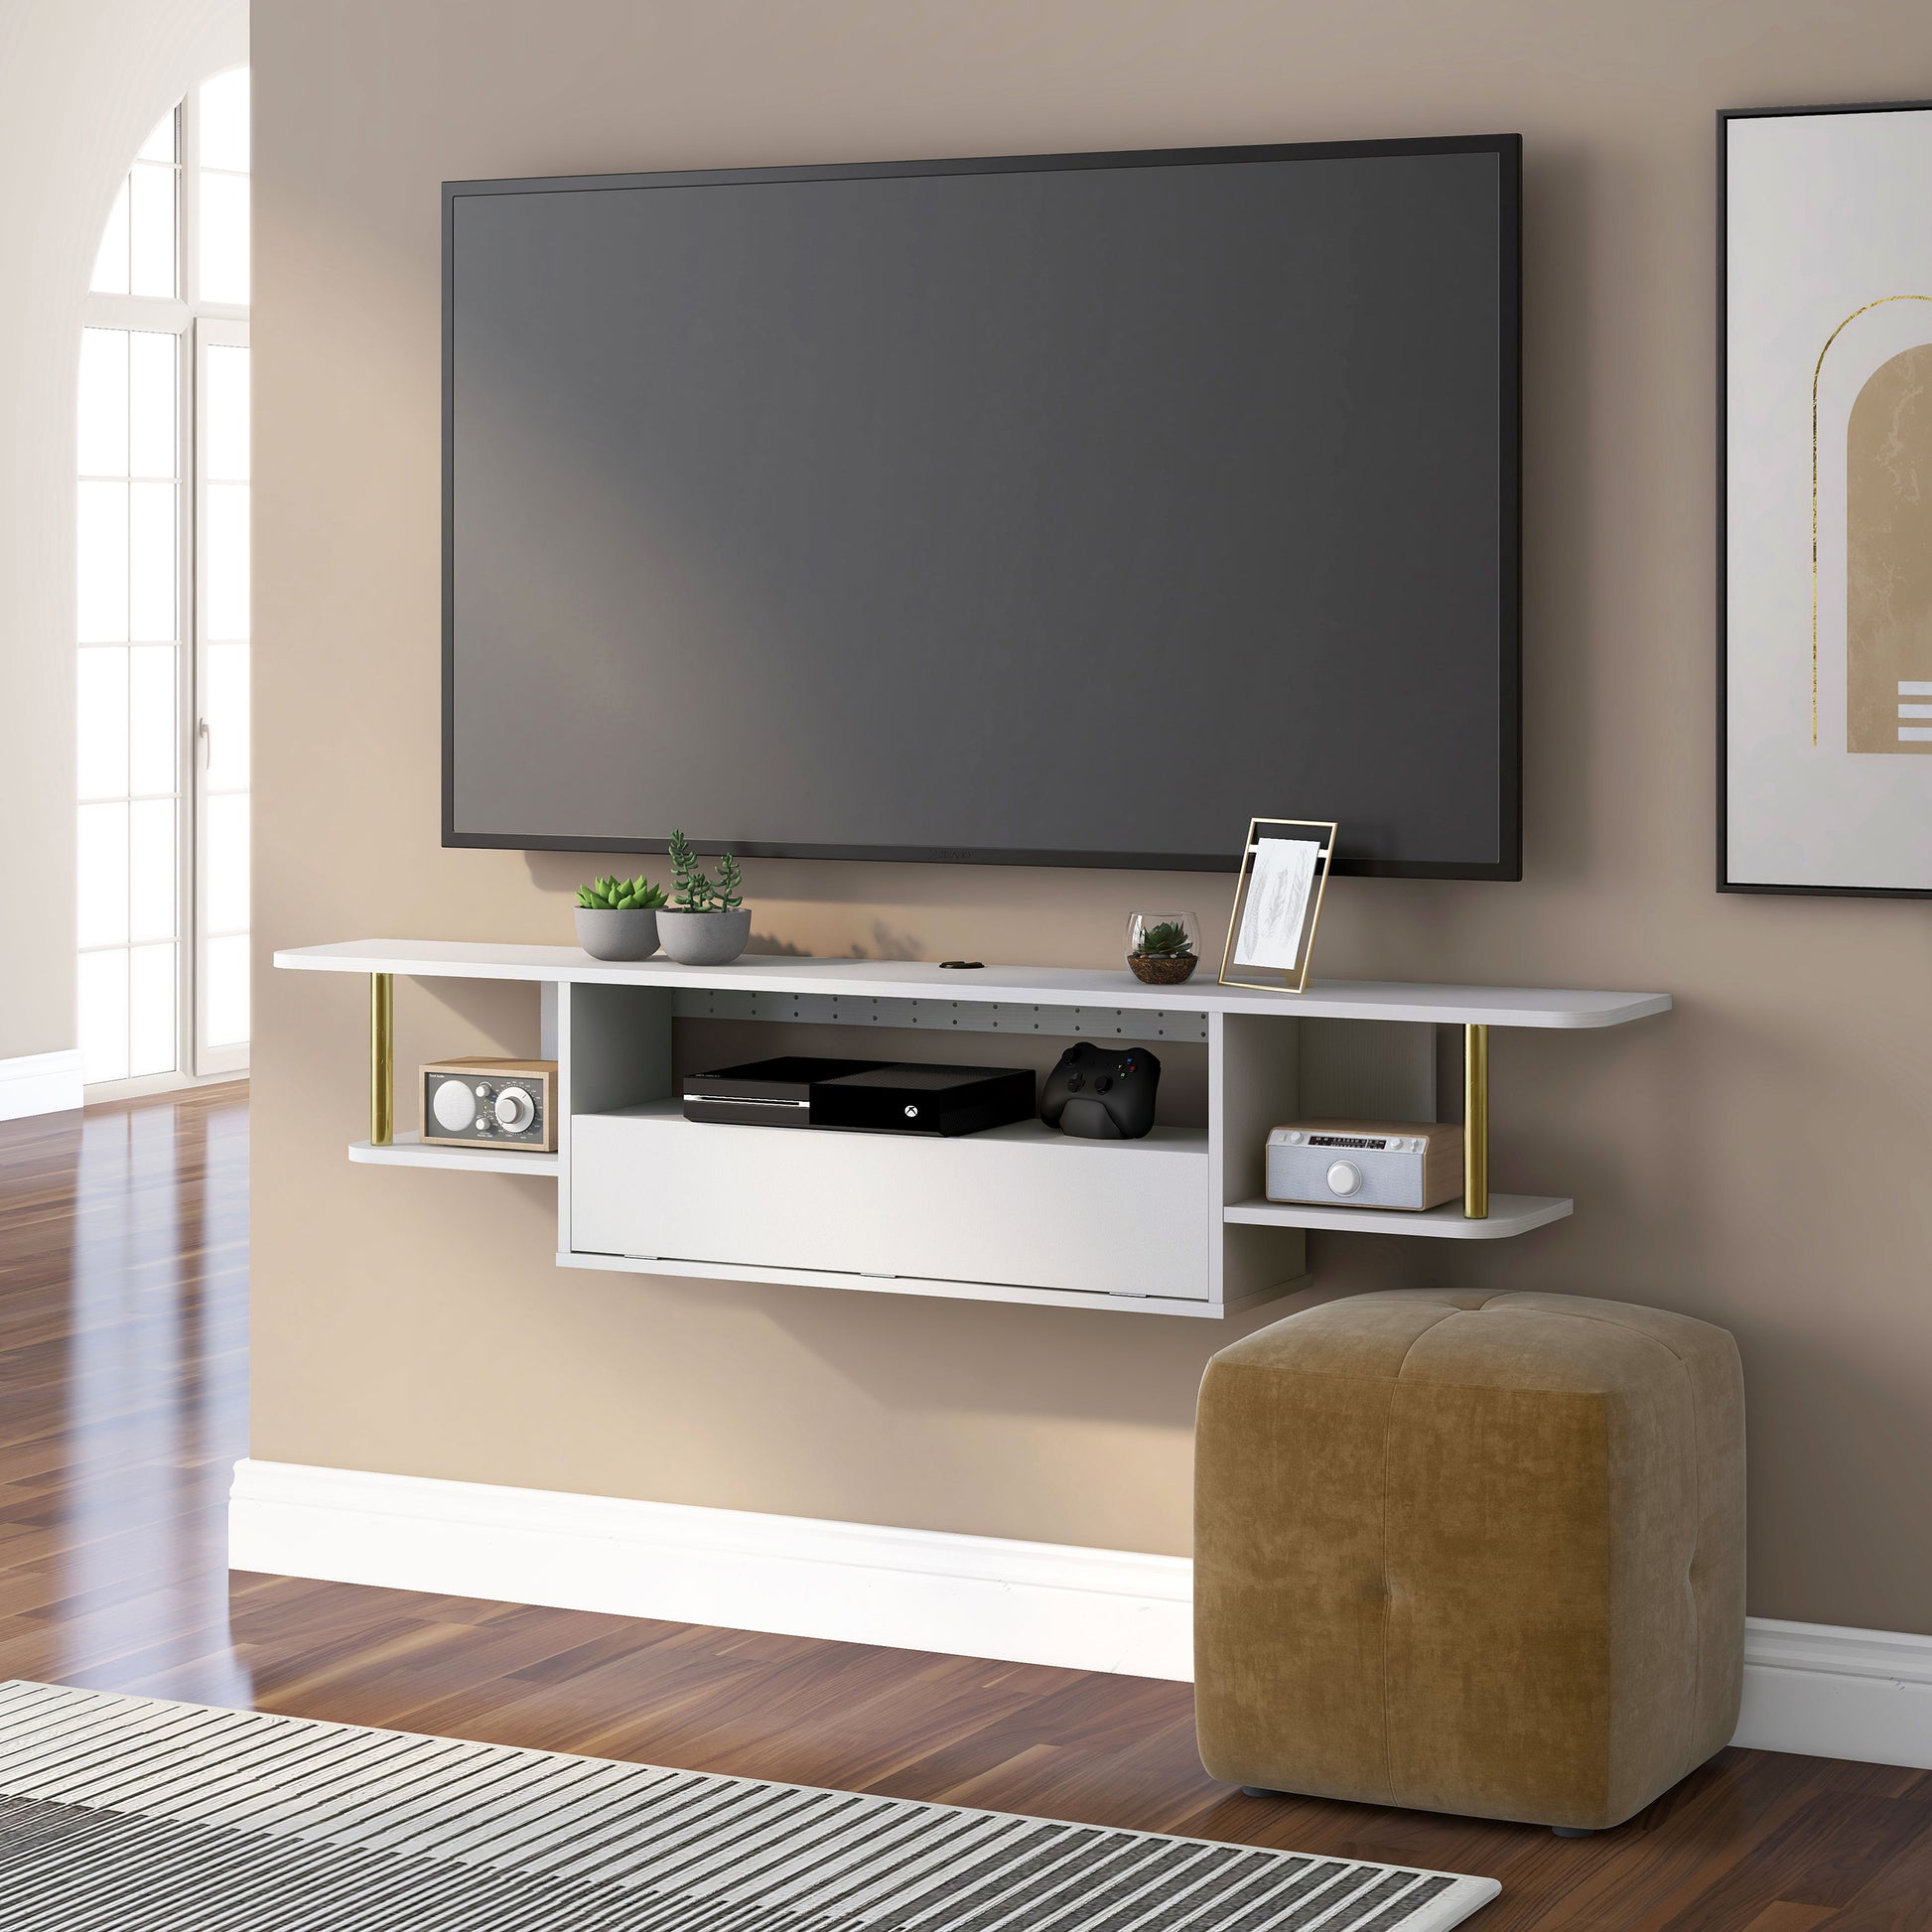 Left angled modern white and gold three-shelf floating TV stand in a living room with accessories